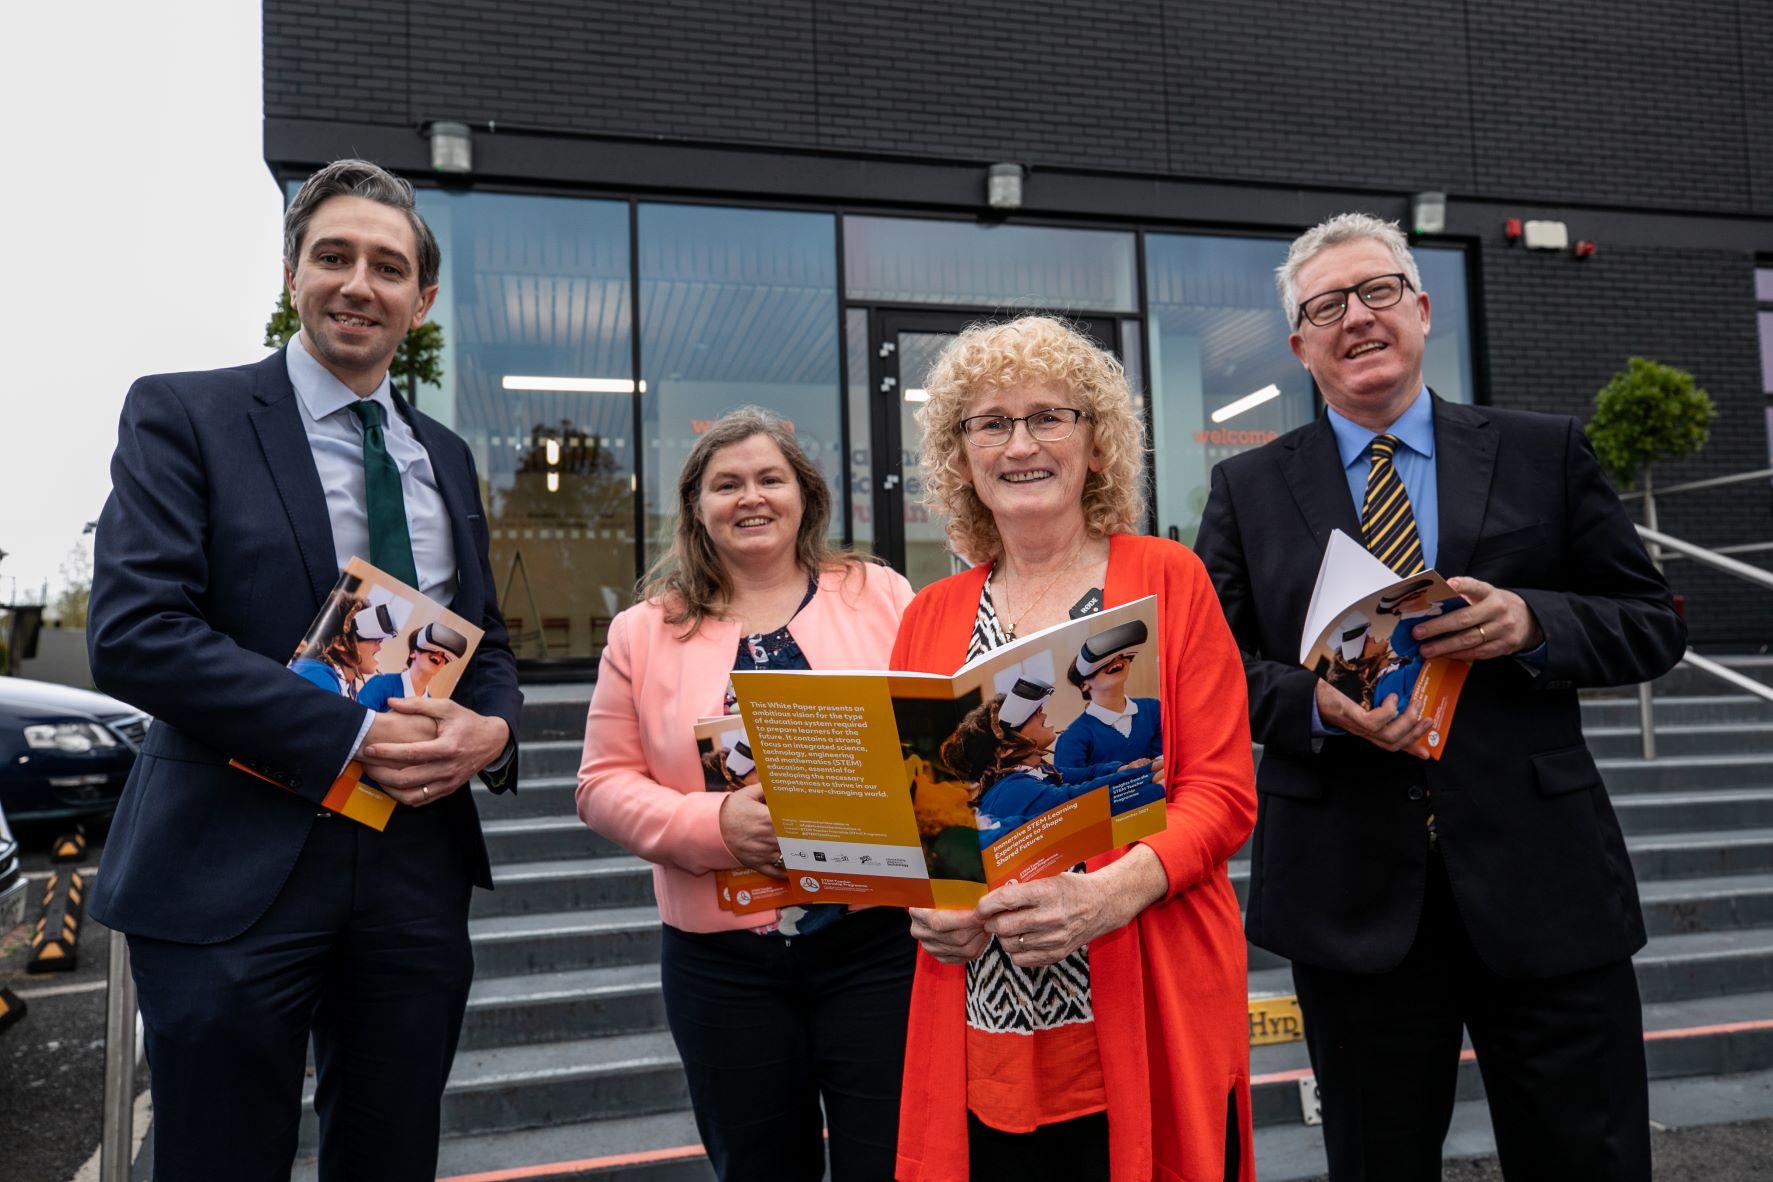 New DCU report on STEM learning calls for further connection between educators and industry to address inequalities and enhance learner outcomes 